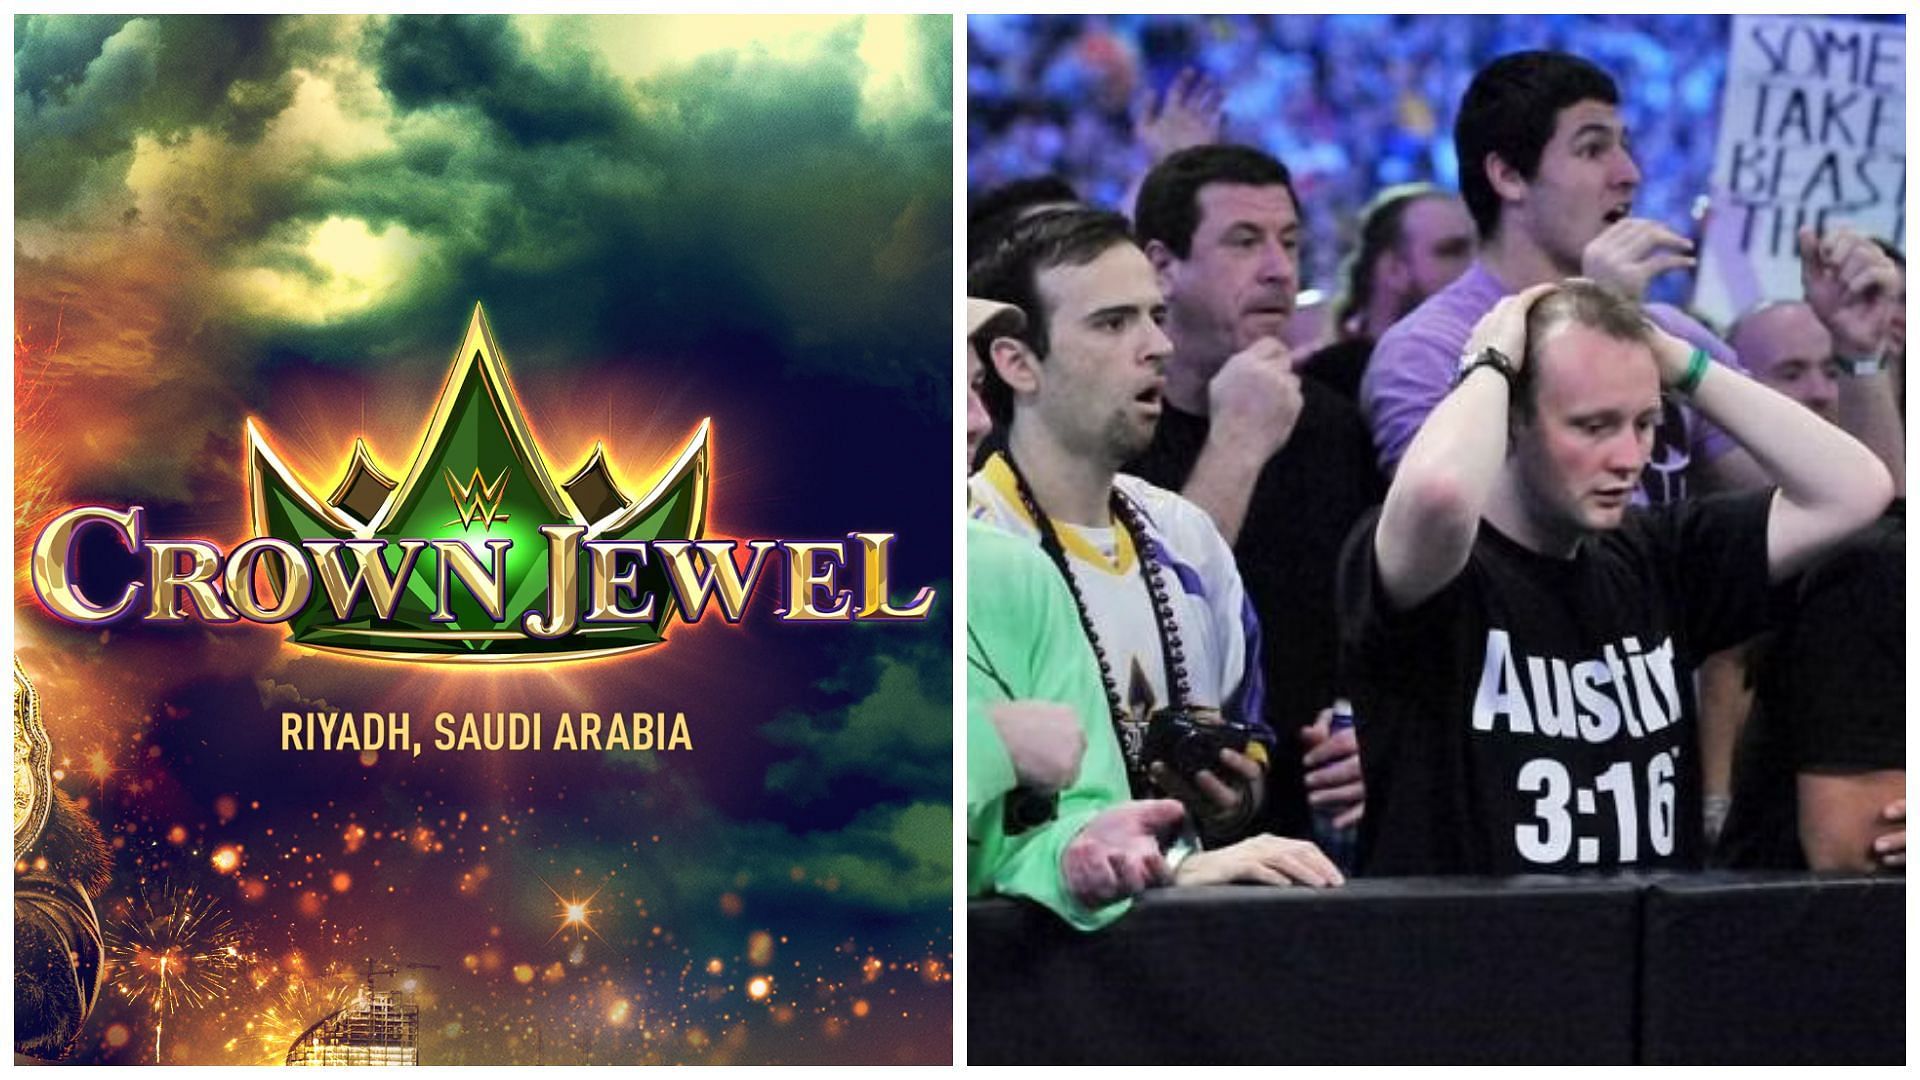 A major faction may split after WWE Crown Jewel.